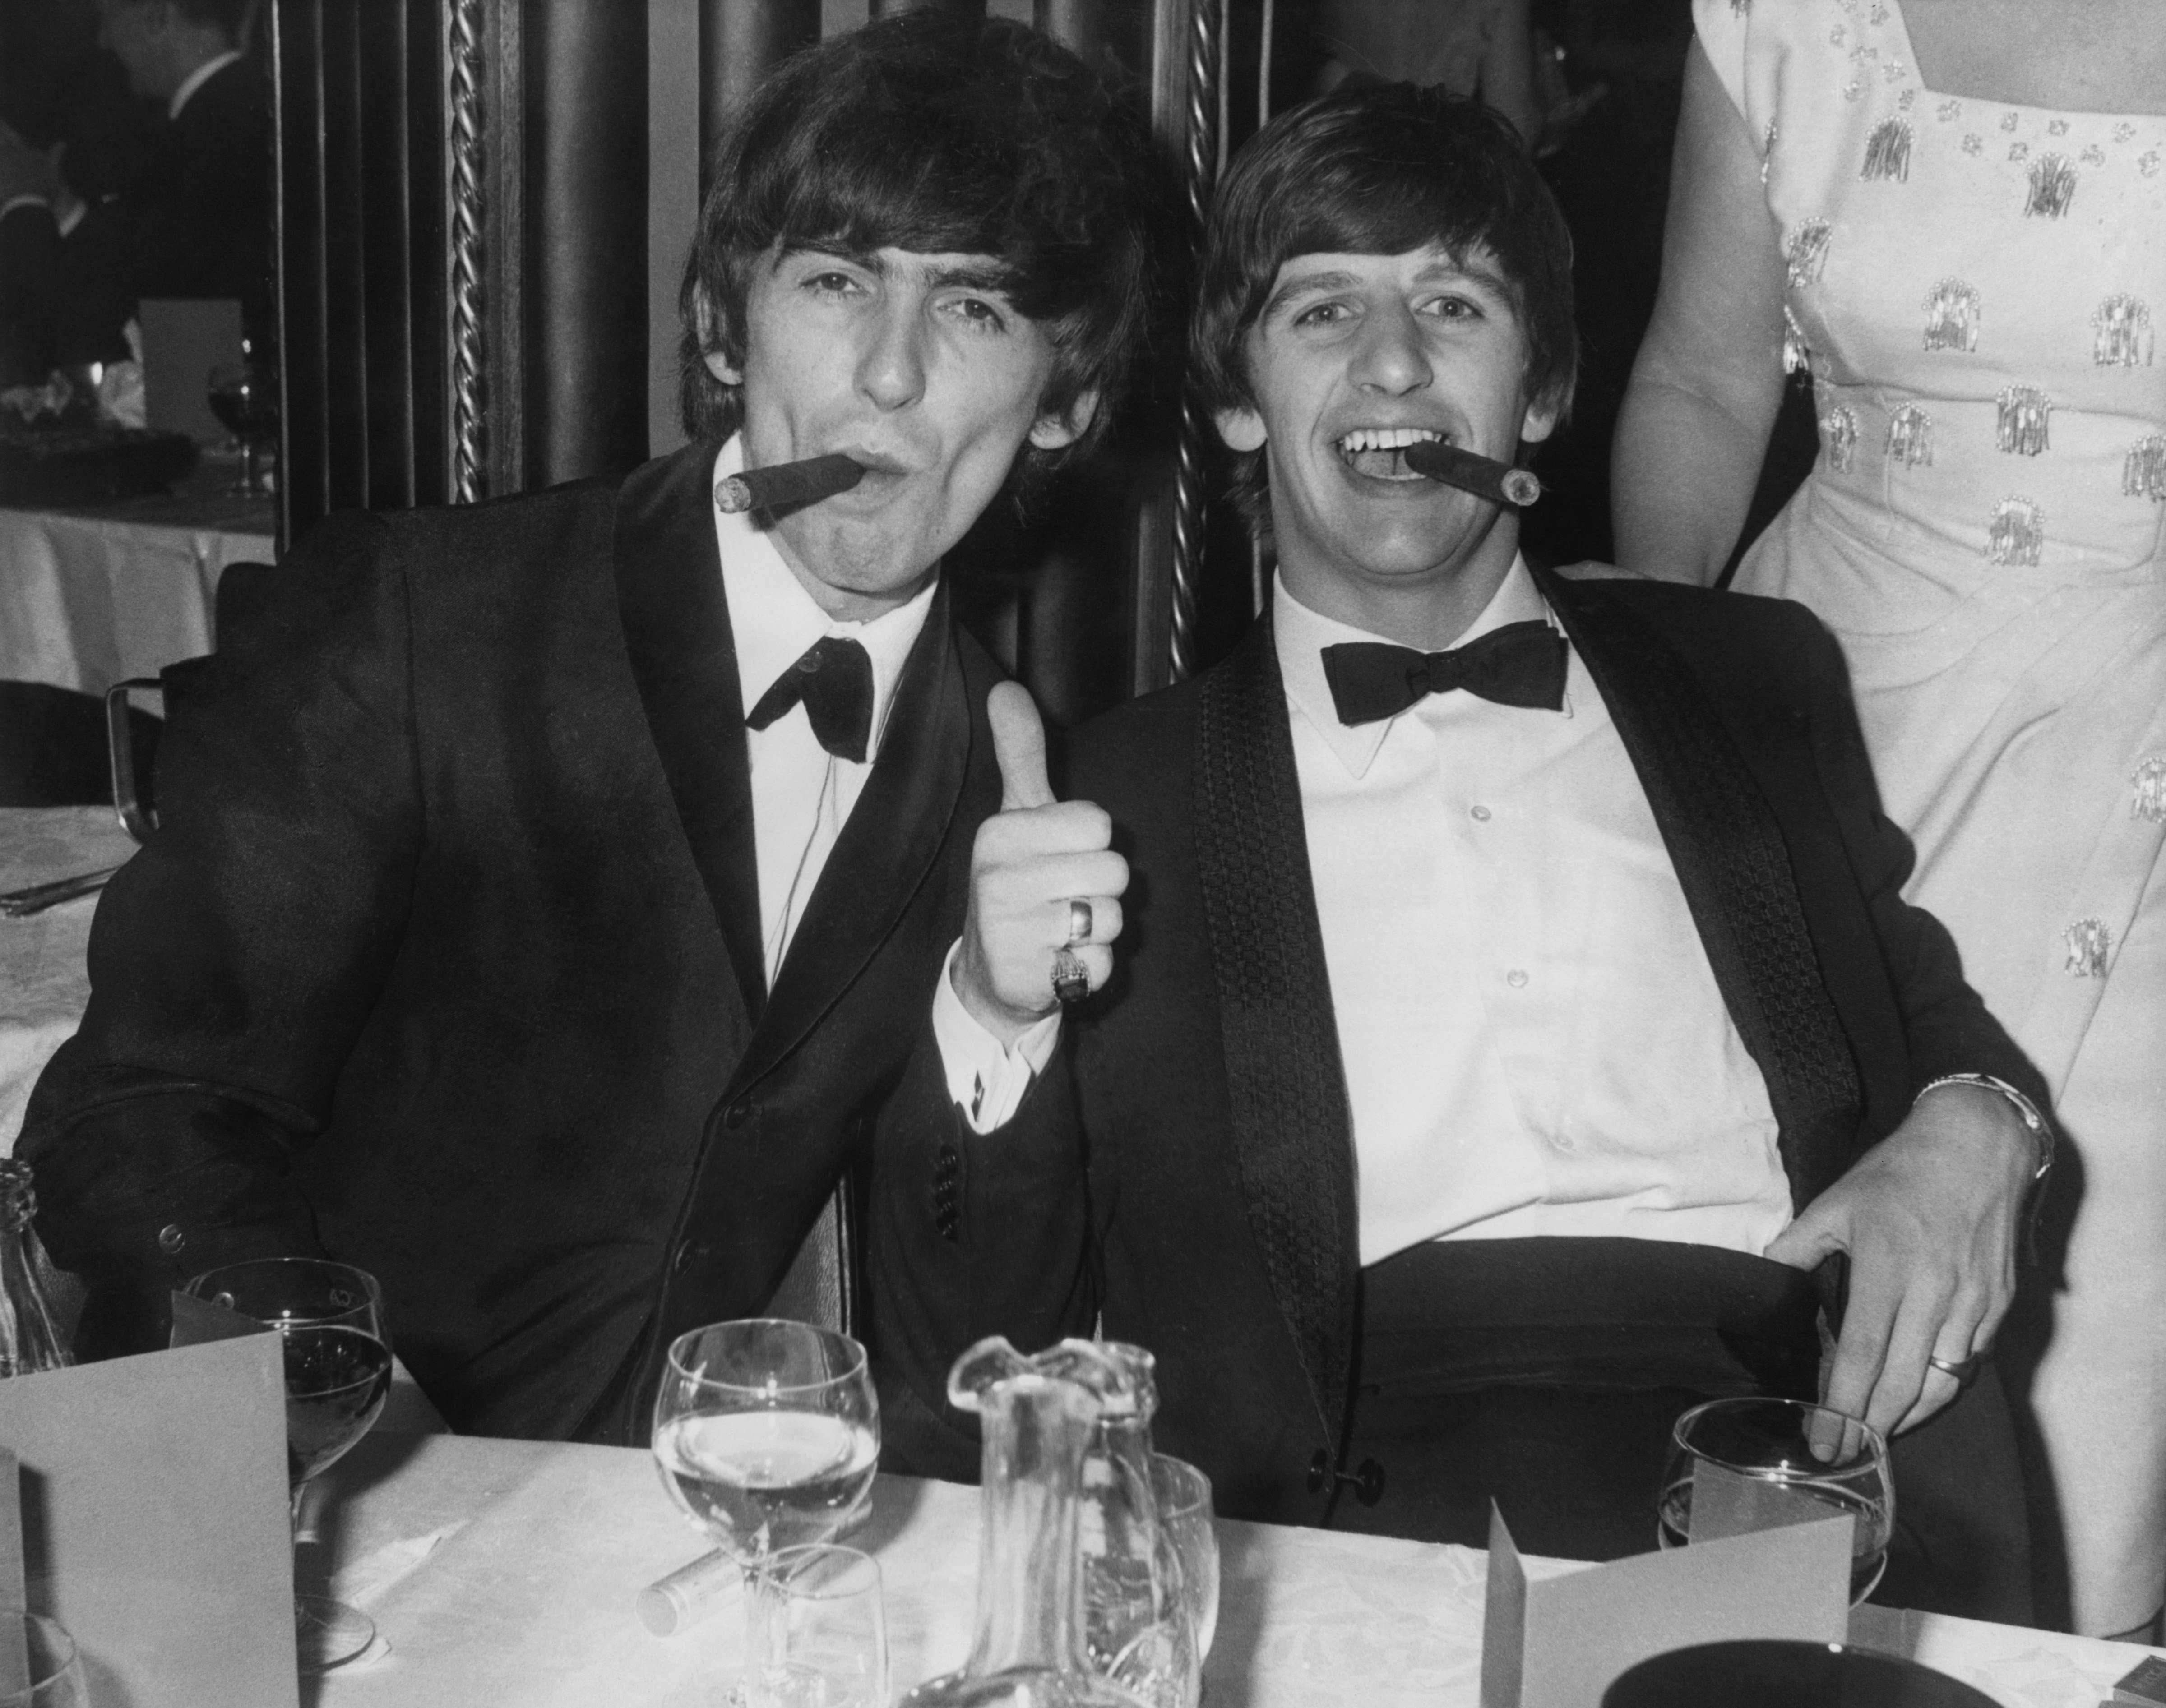 Beatles band mates George Harrison and Ringo Starr sit together during a 1964 awards show. Both are dressed in tuxedos and smoking cigars, while Starr gives a thumbs up.